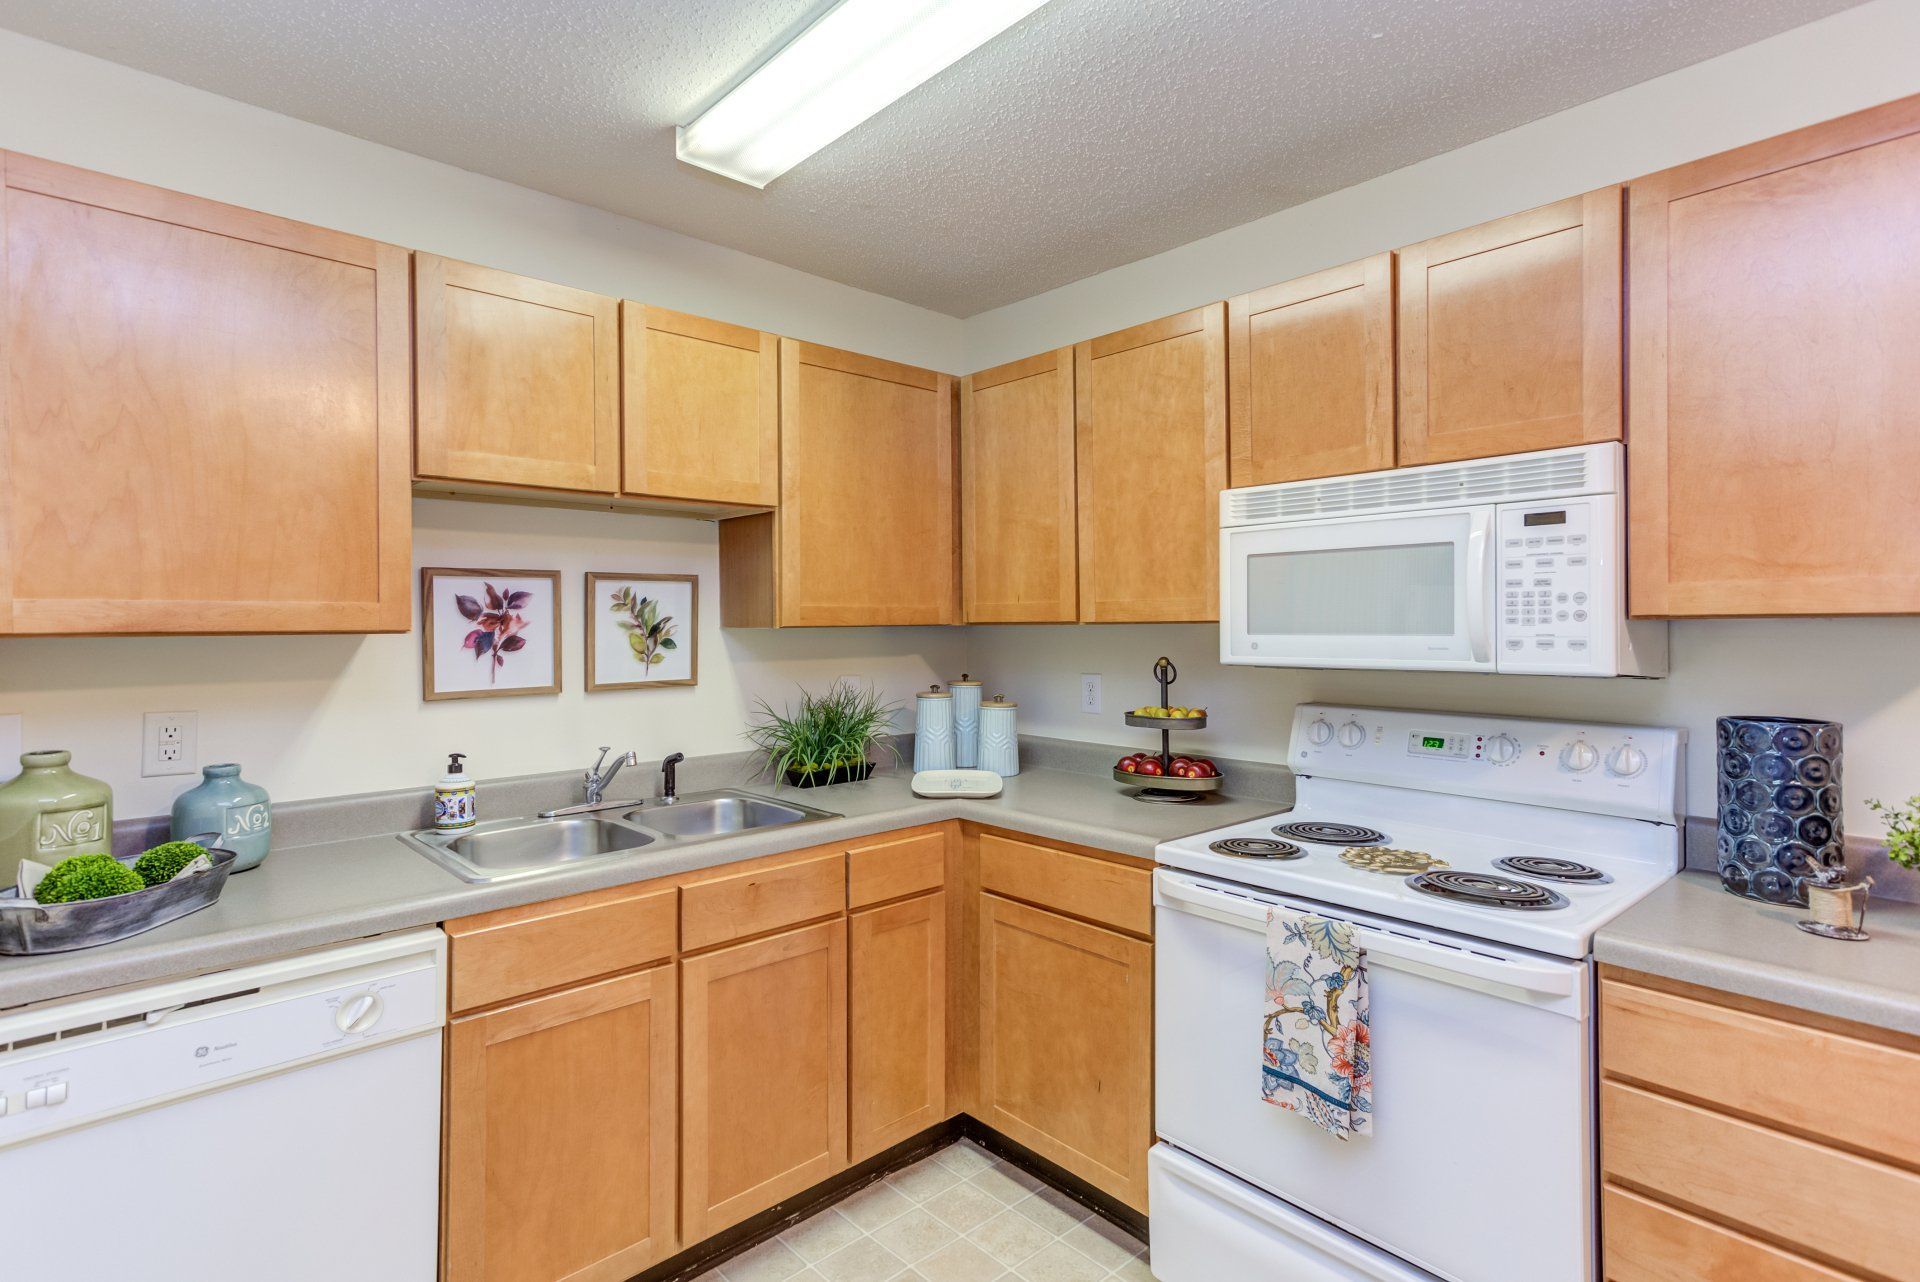 A kitchen with wooden cabinets, a stove, a dishwasher, and a microwave at Morgan Ridge.